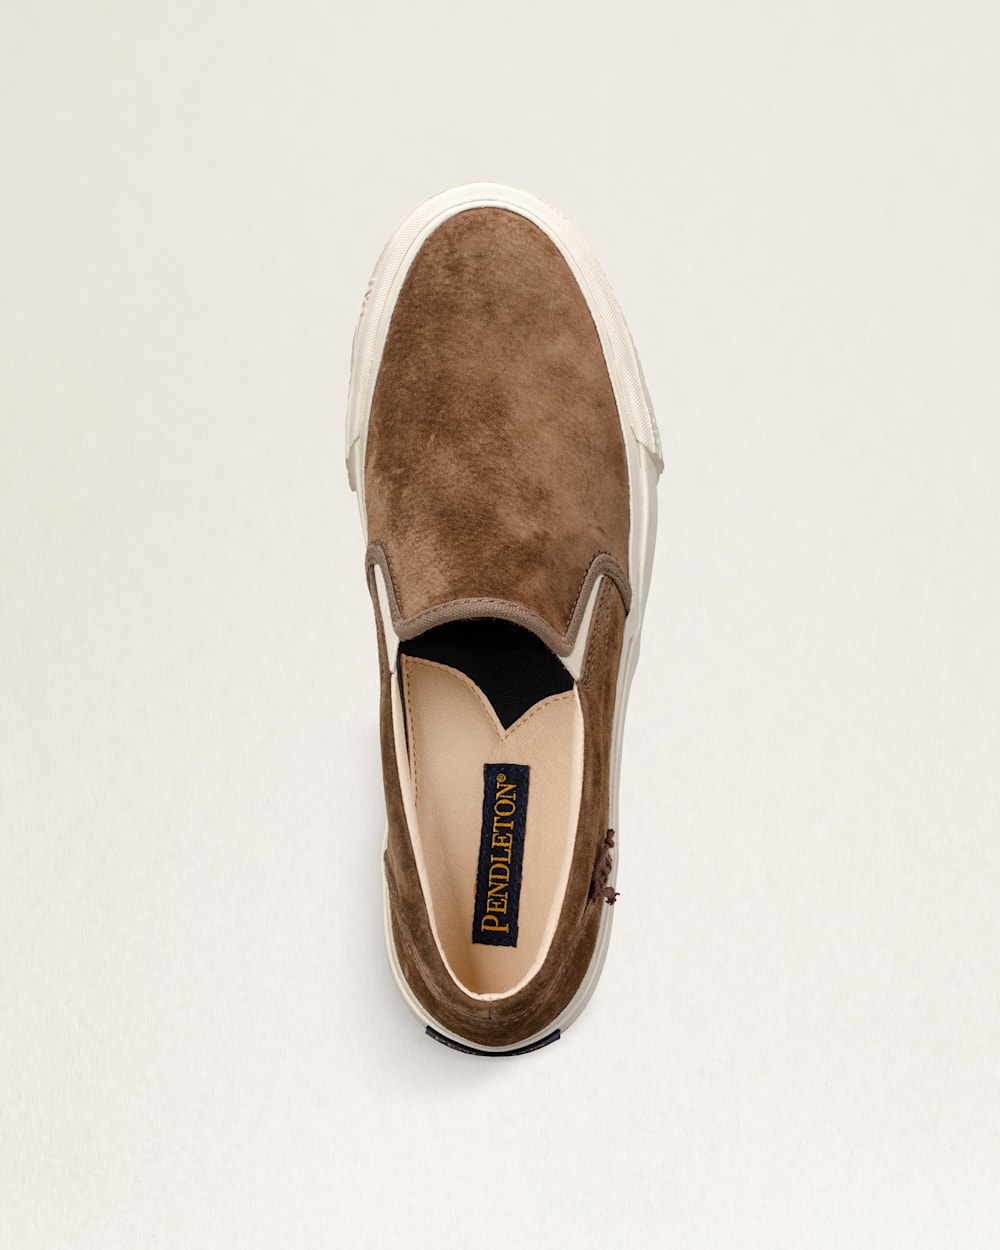 ALTERNATE VIEW OF MEN'S SUEDE SLIP-ON SHOES IN BROWN image number 5